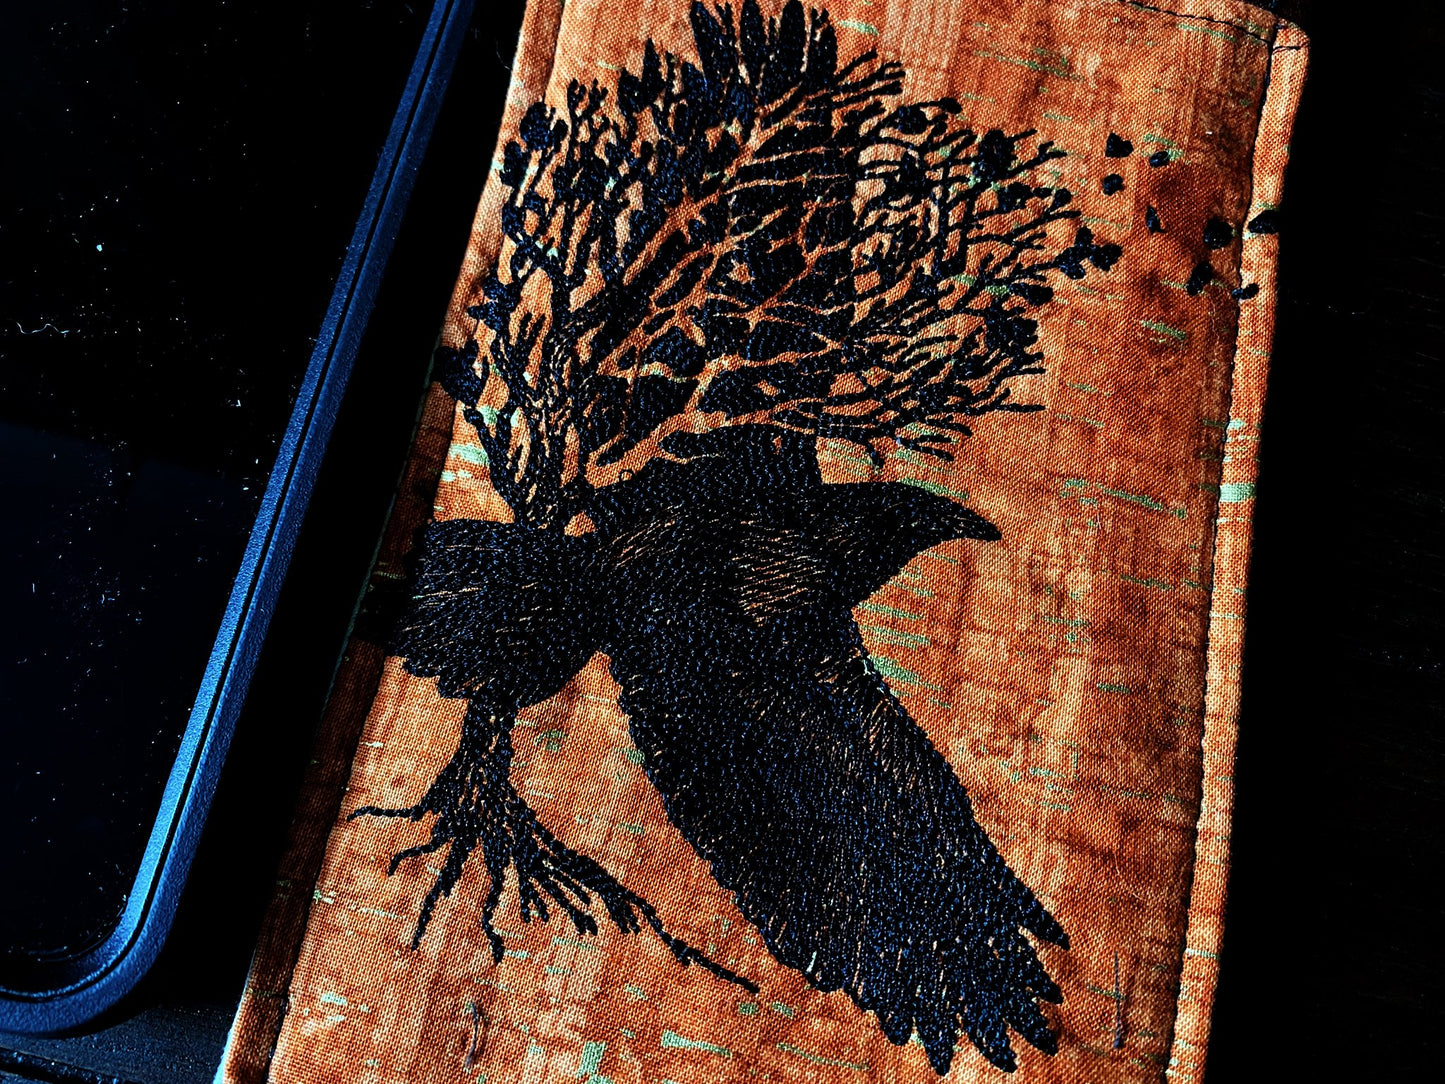 Her Familiars Phone Pouch with Internal Card Pocket